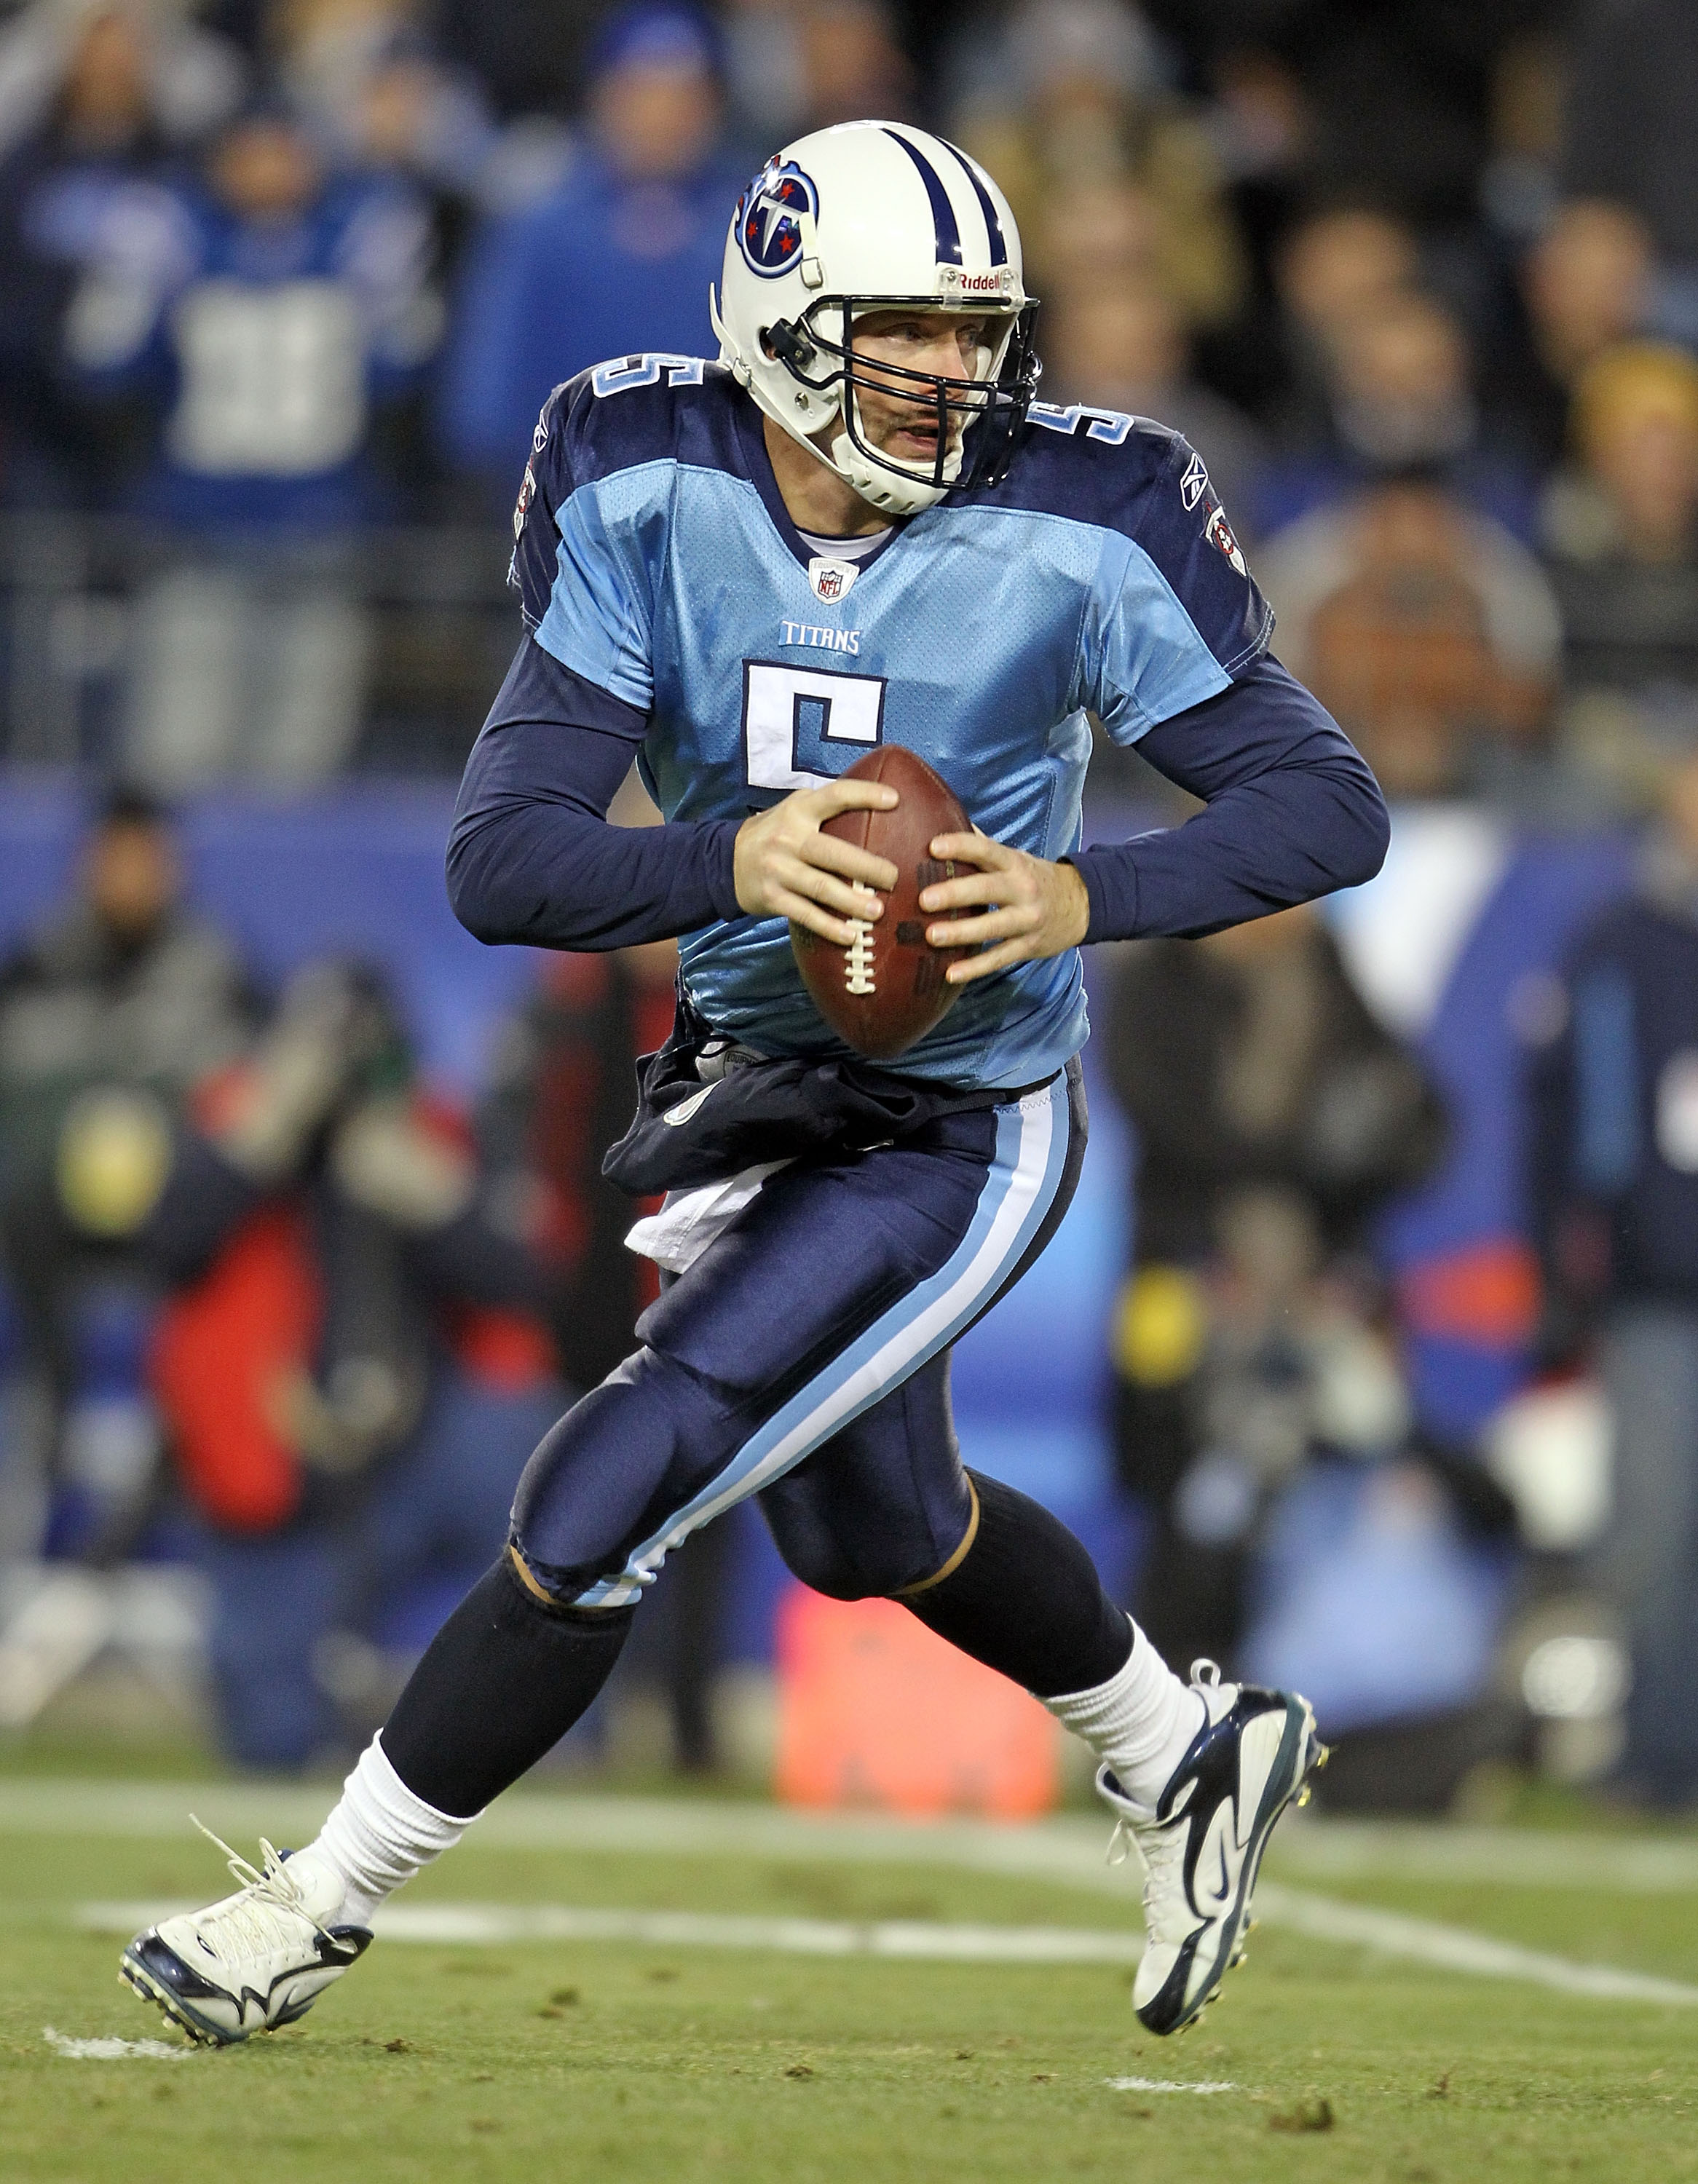 NASHVILLE, TN - DECEMBER 09:  Kerry Collins #5 of the Tennessee Titans runs with the ball against the Indianapolis Colts during the NFL game at LP Field on December 9, 2010 in Nashville, Tennessee.  (Photo by Andy Lyons/Getty Images)